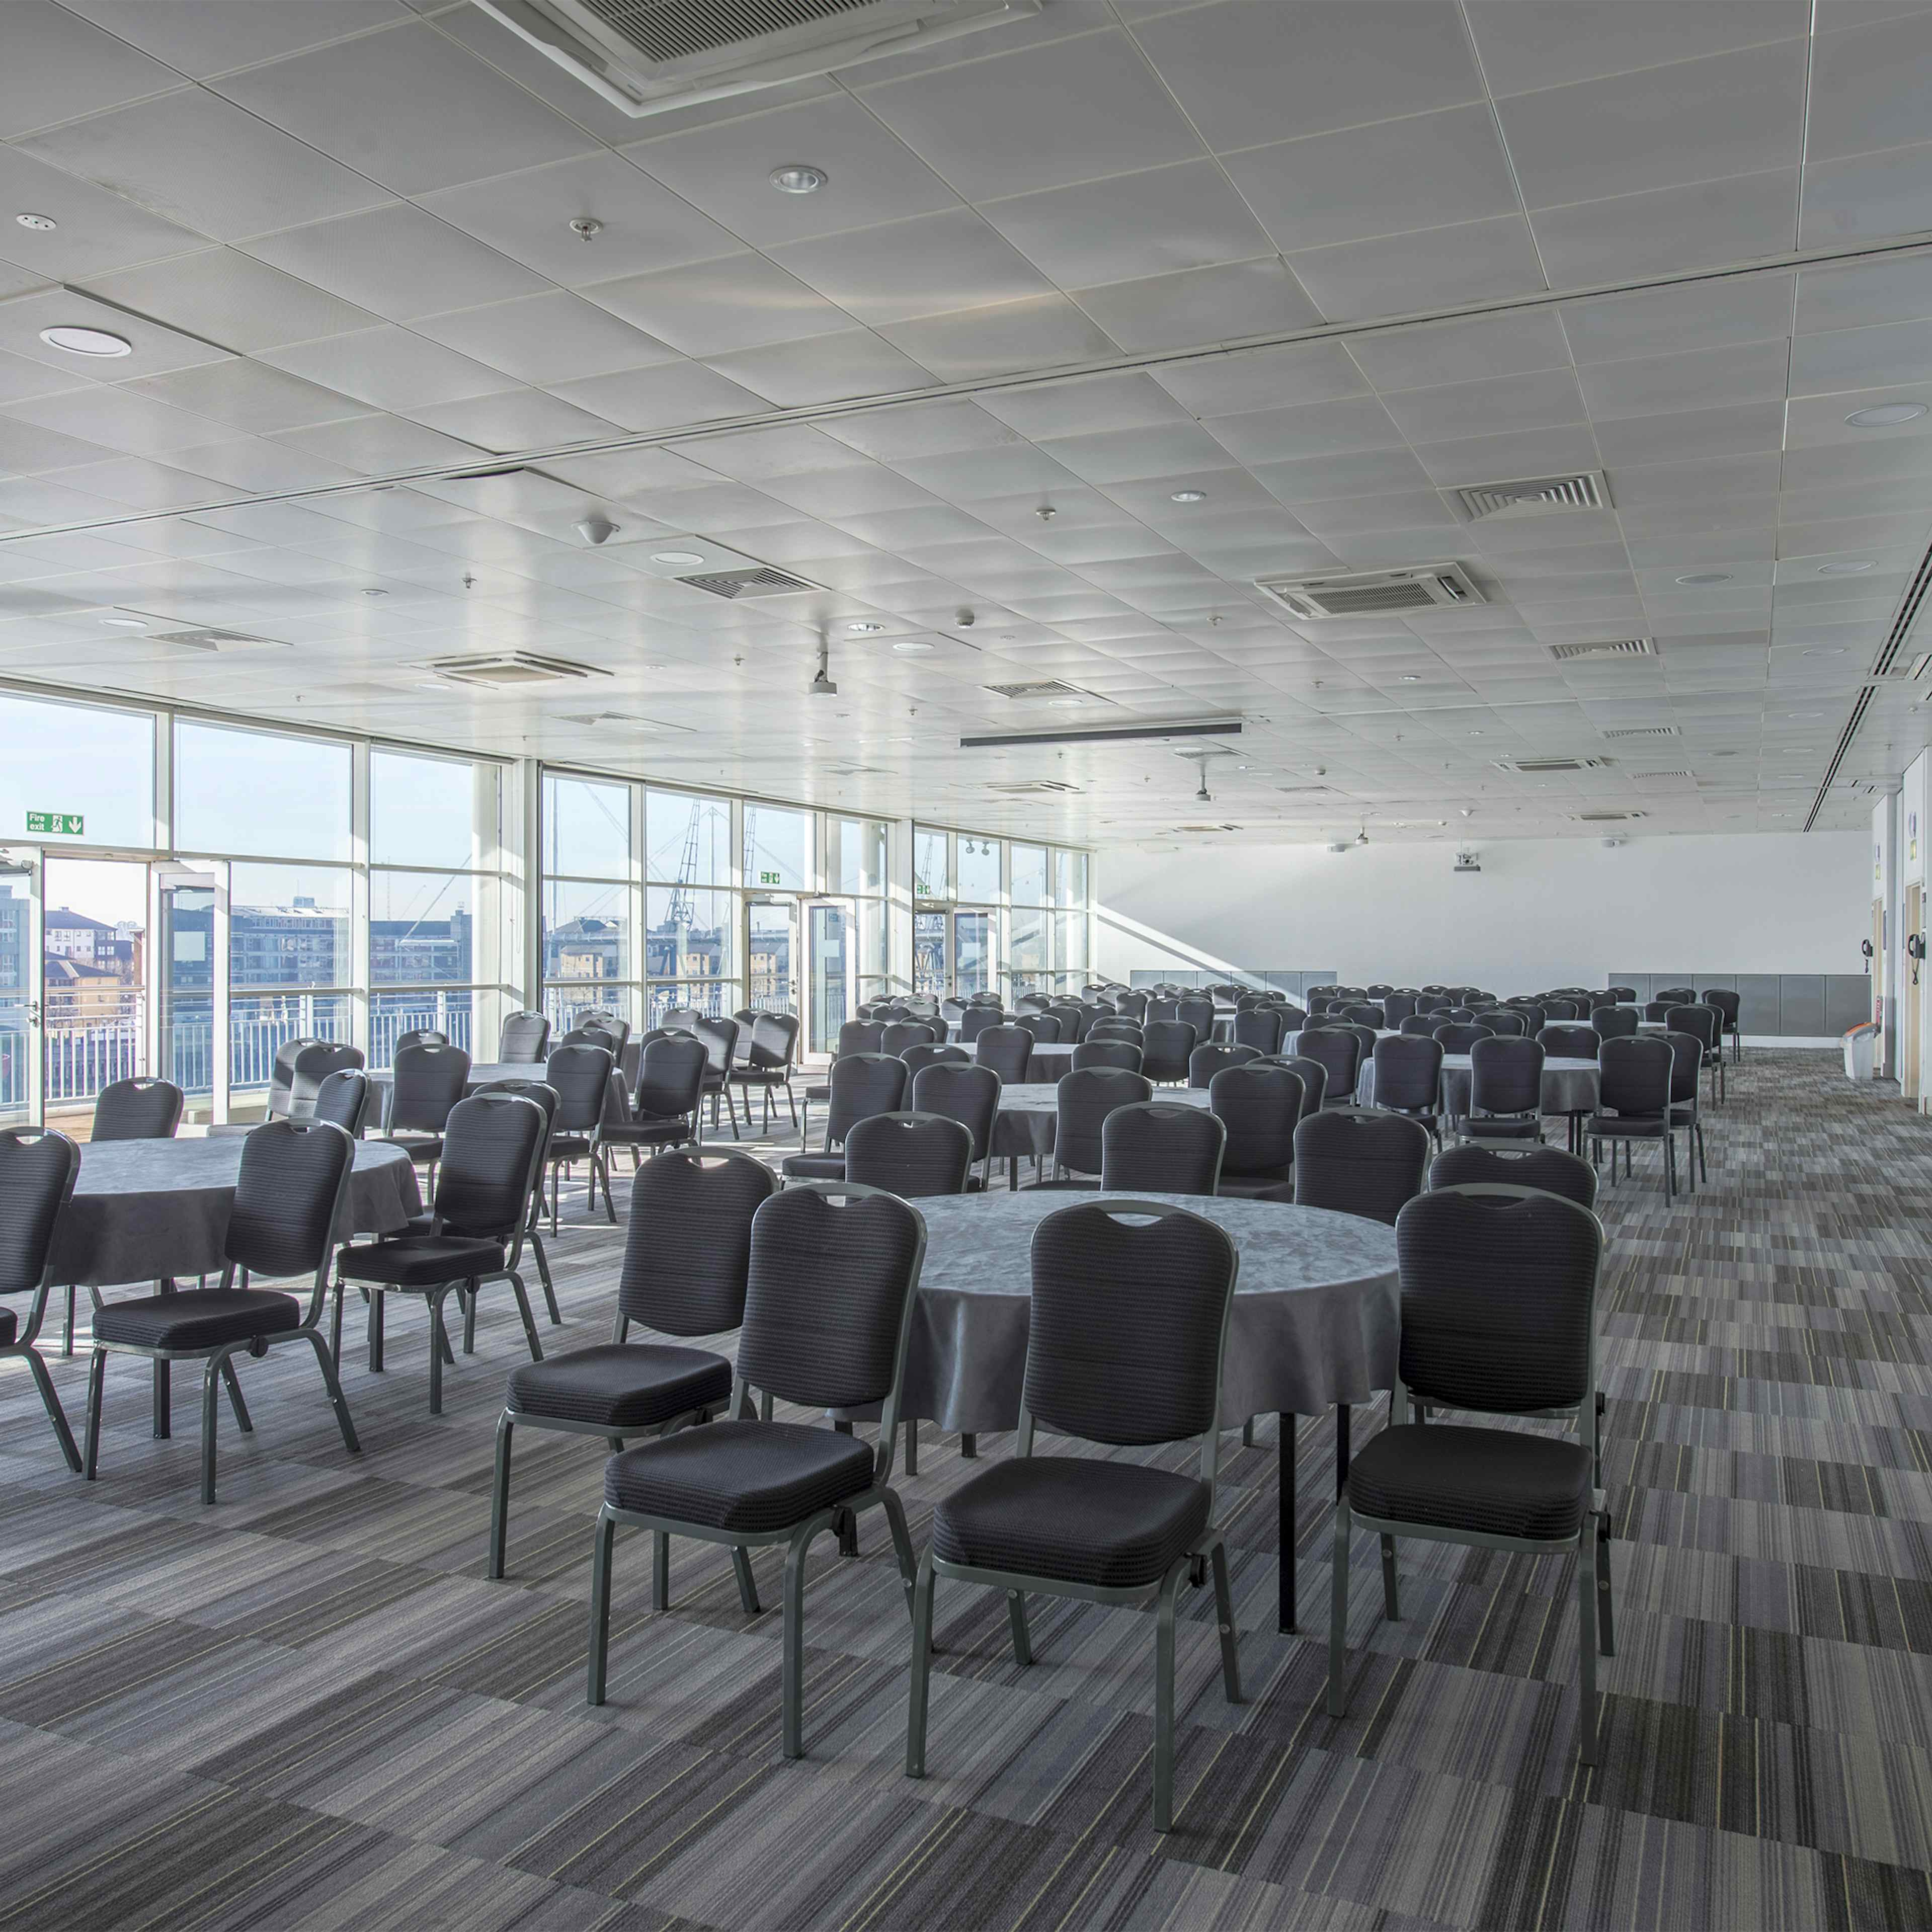 ExCeL London - CentrEd image 3